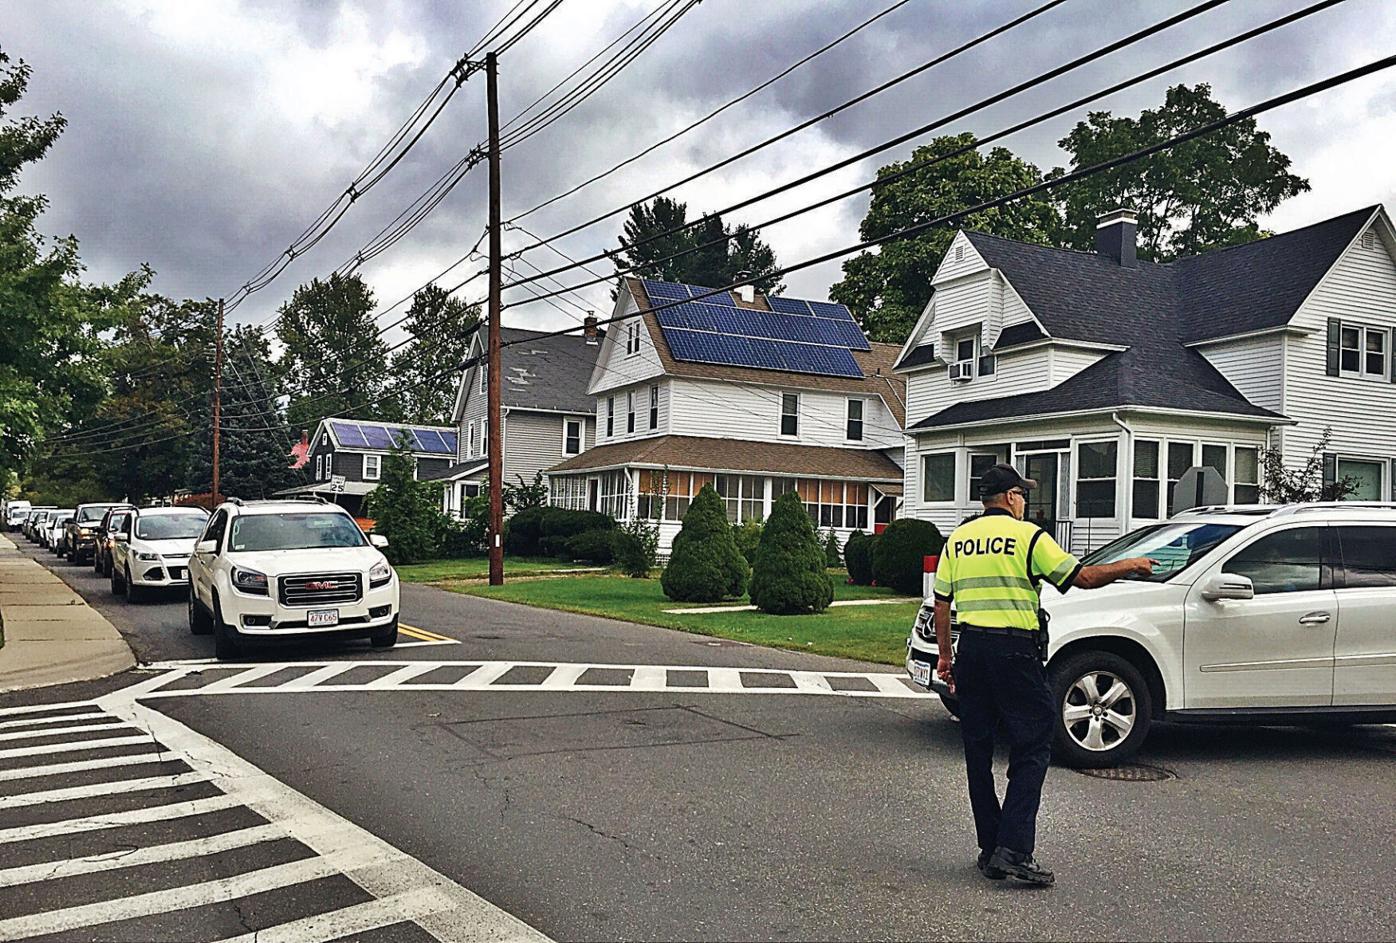 Transformer fire knocks out power, snarls traffic in Great Barrington